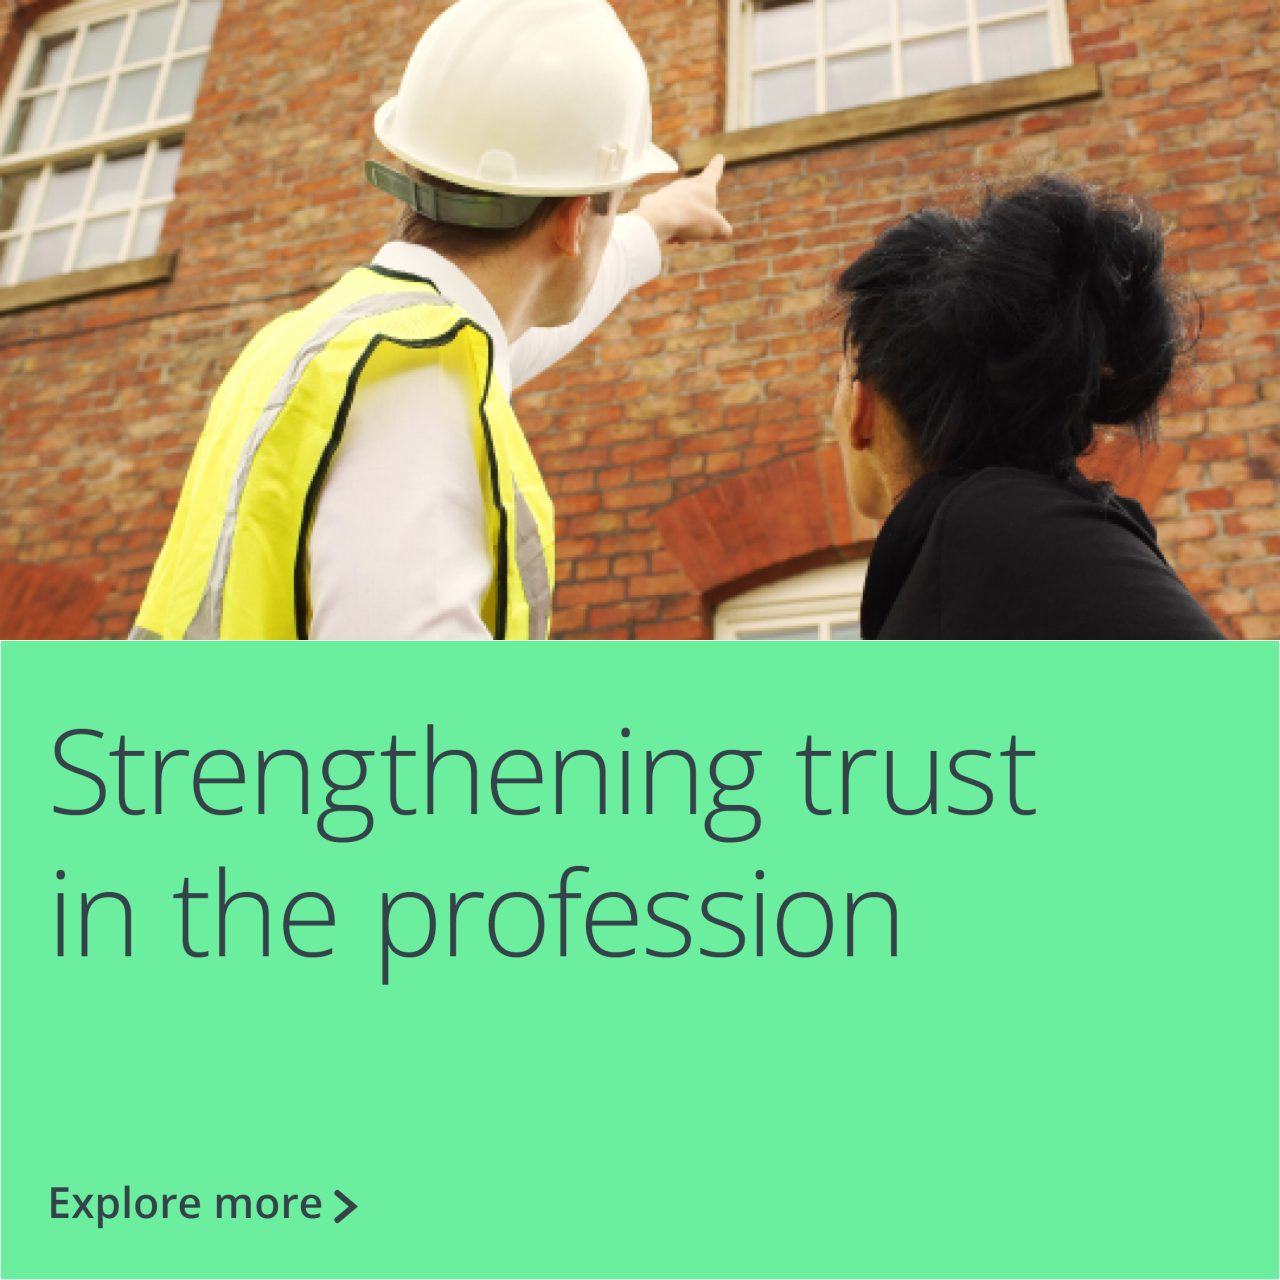 Section 2: Strengthening trust  in the profession